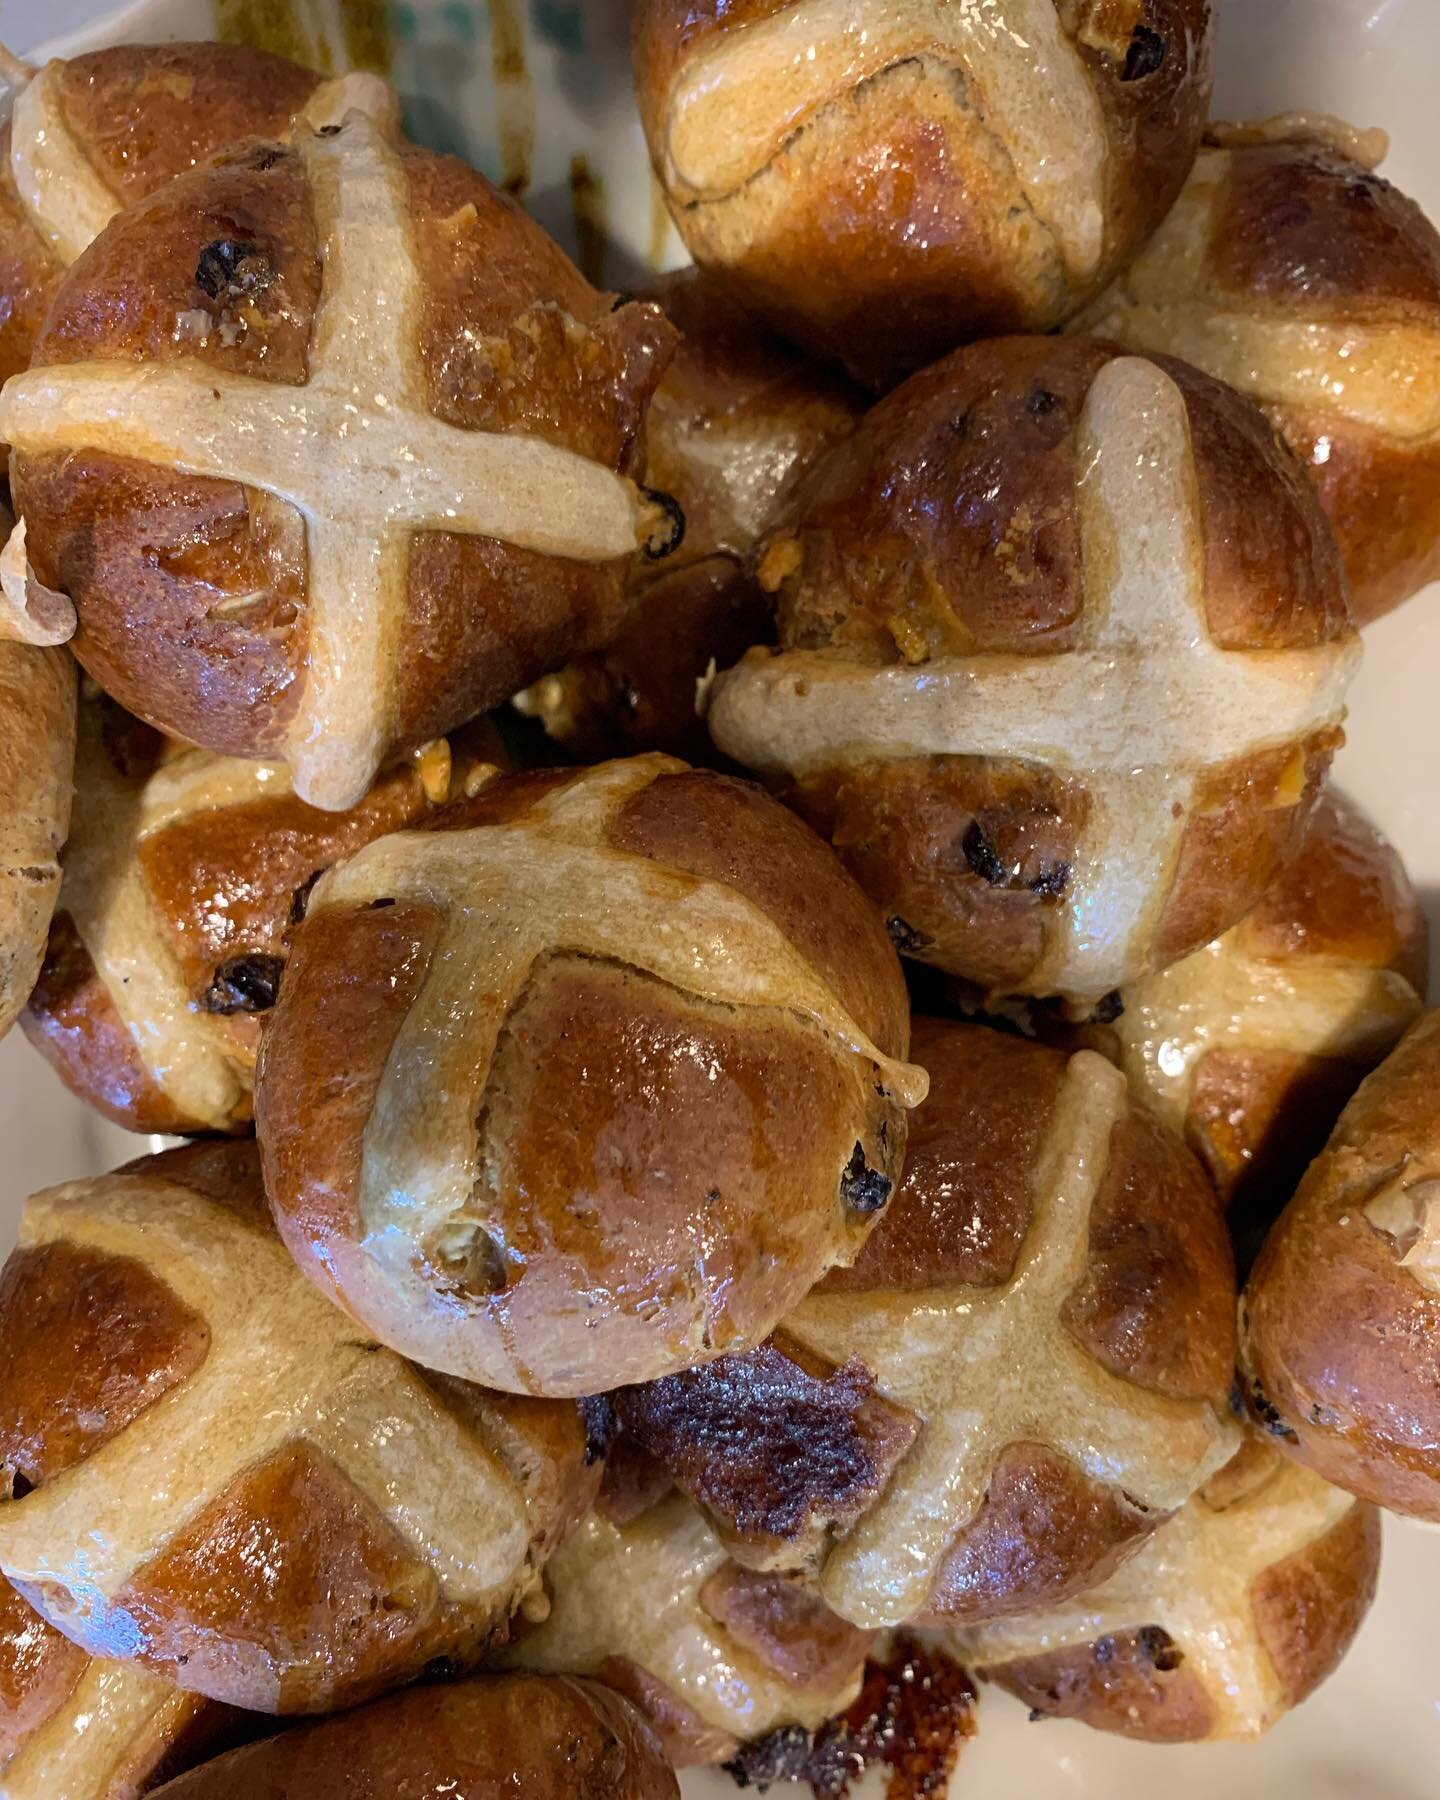 Our homemade hot cross buns are in store today . Get them before they are gone &hellip; 
#hotcrossbuns #homemade #shoplocal #thegranary #lent